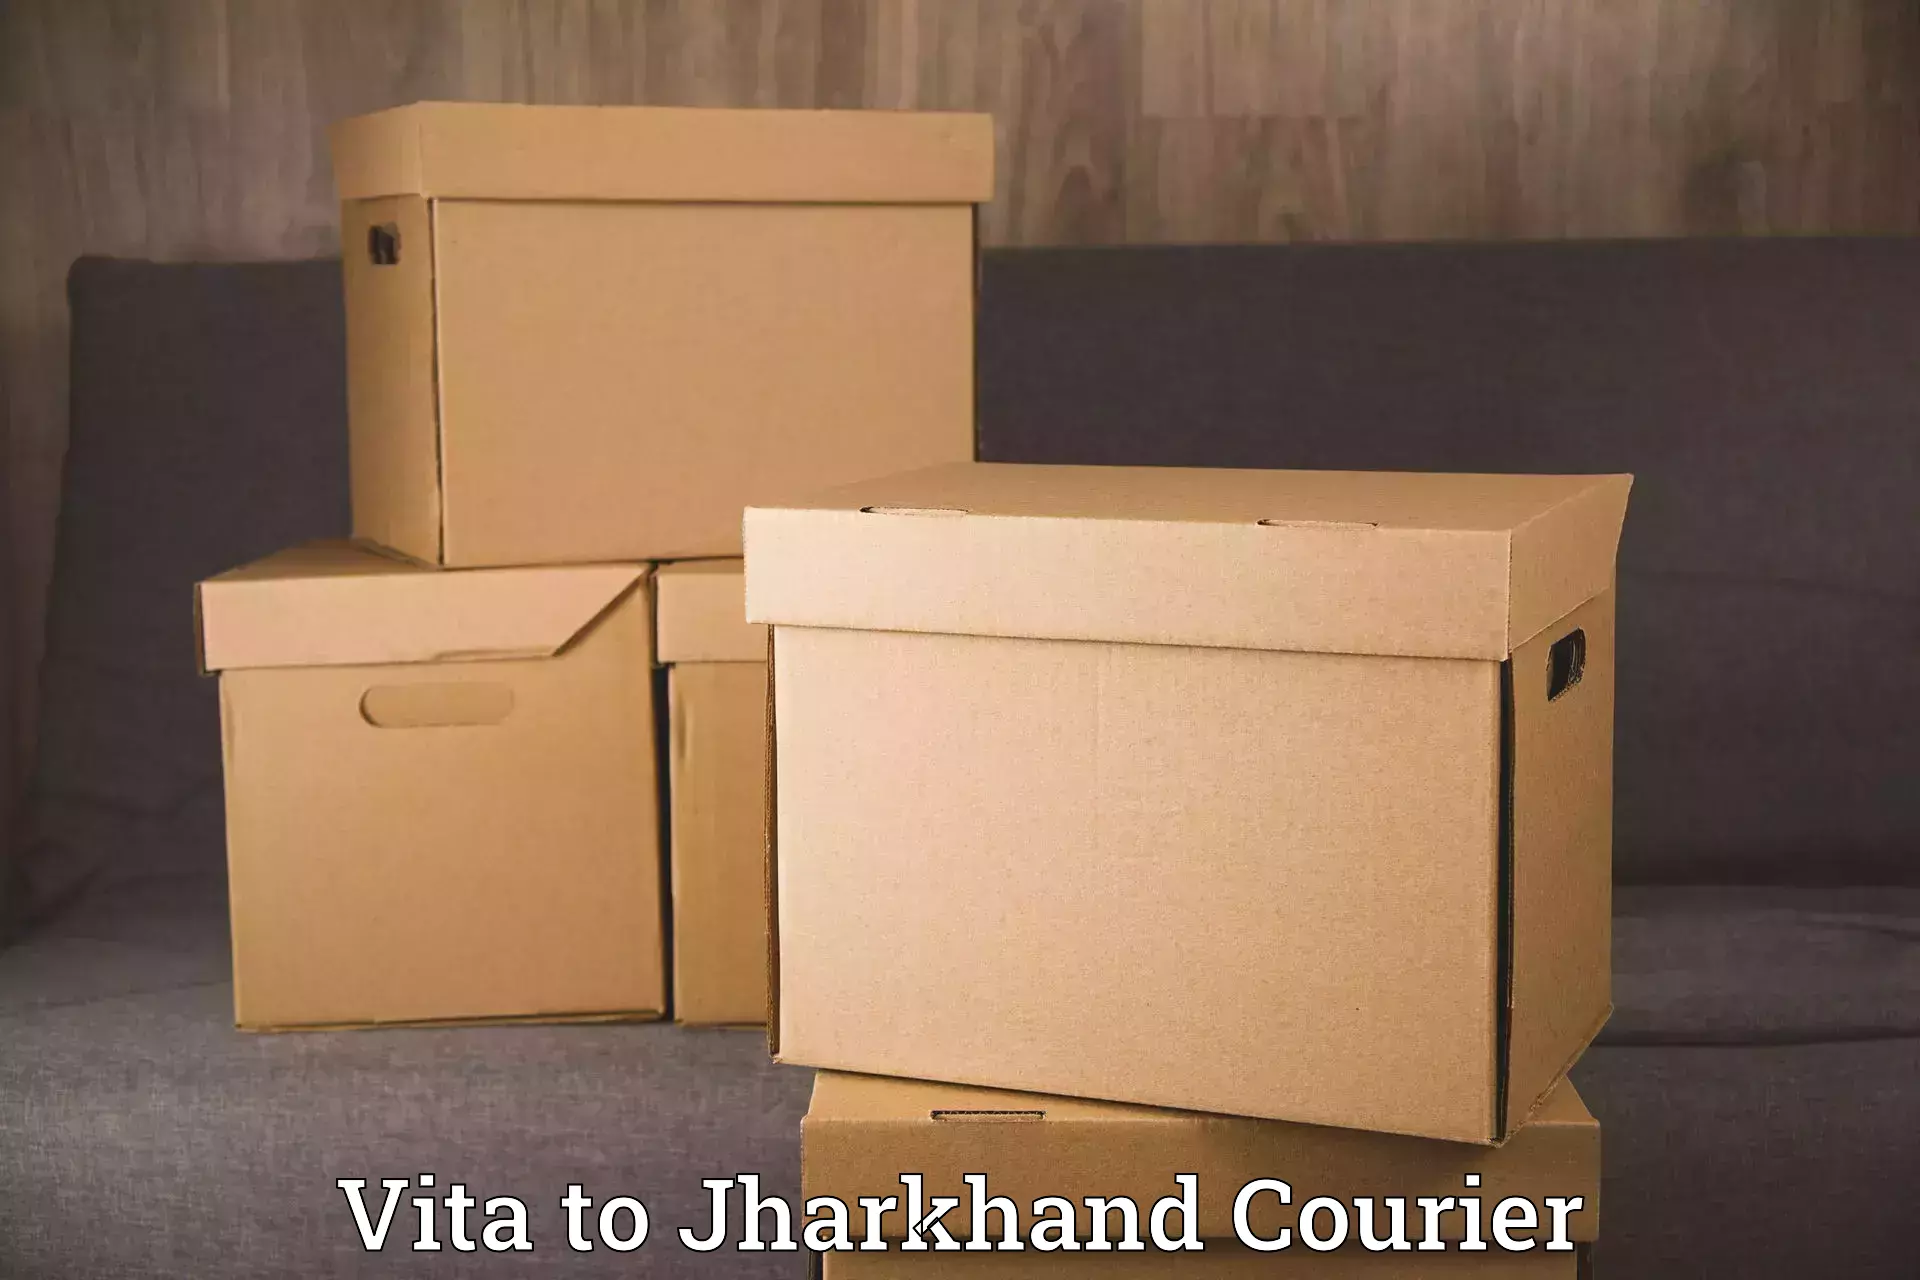 Household goods movers and packers Vita to Peterbar